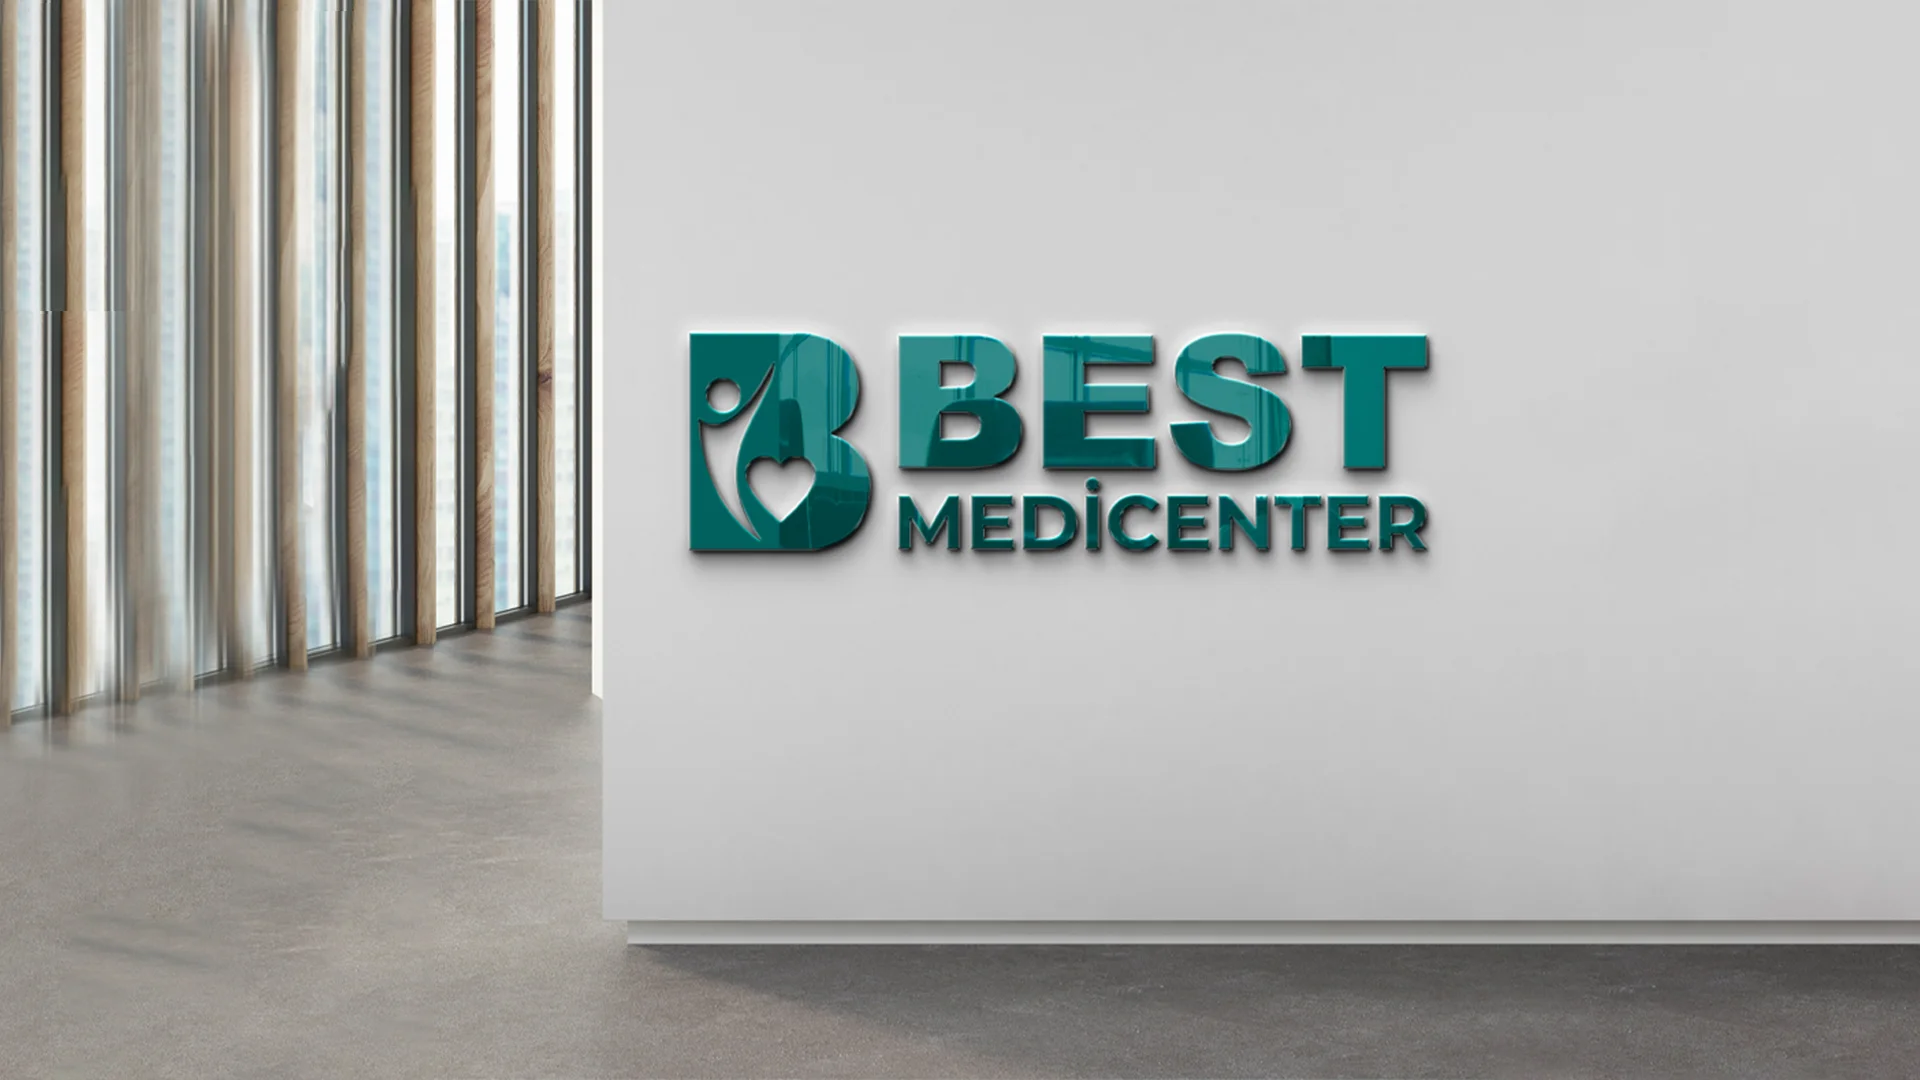 Best Medicenter Brand Identity and Positioning